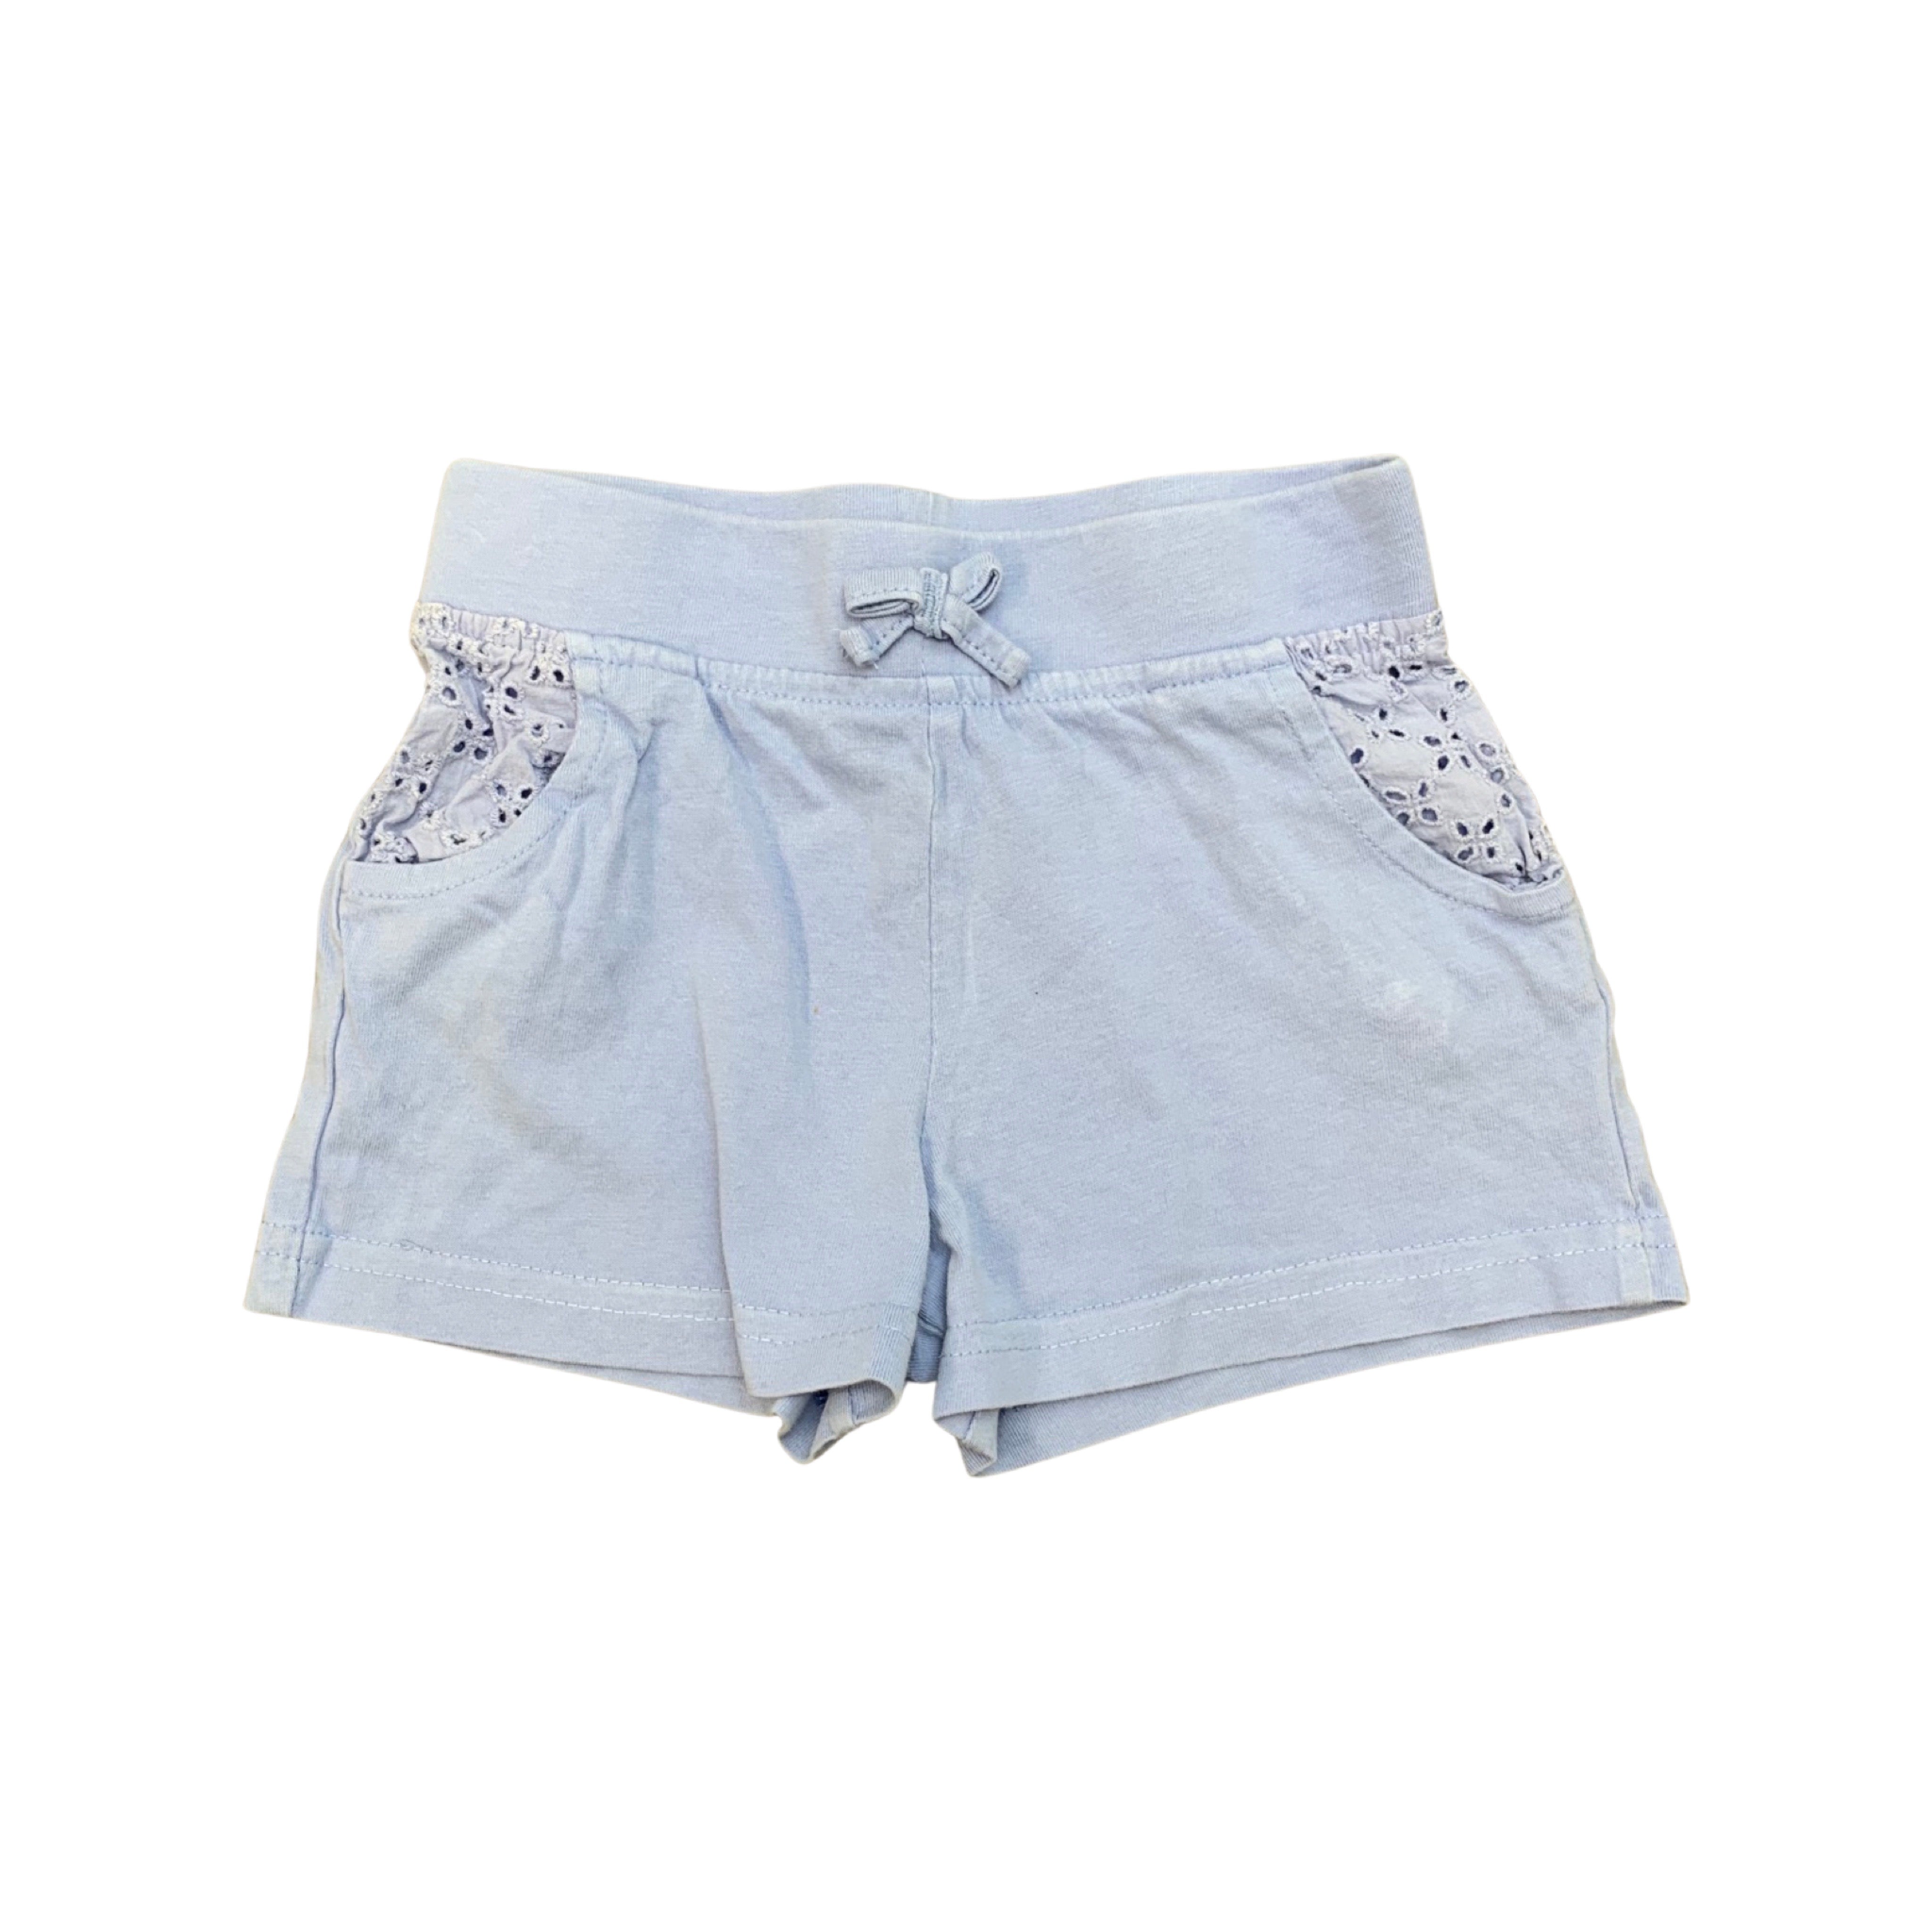 George Jersey Shorts Girls 3-4 Years